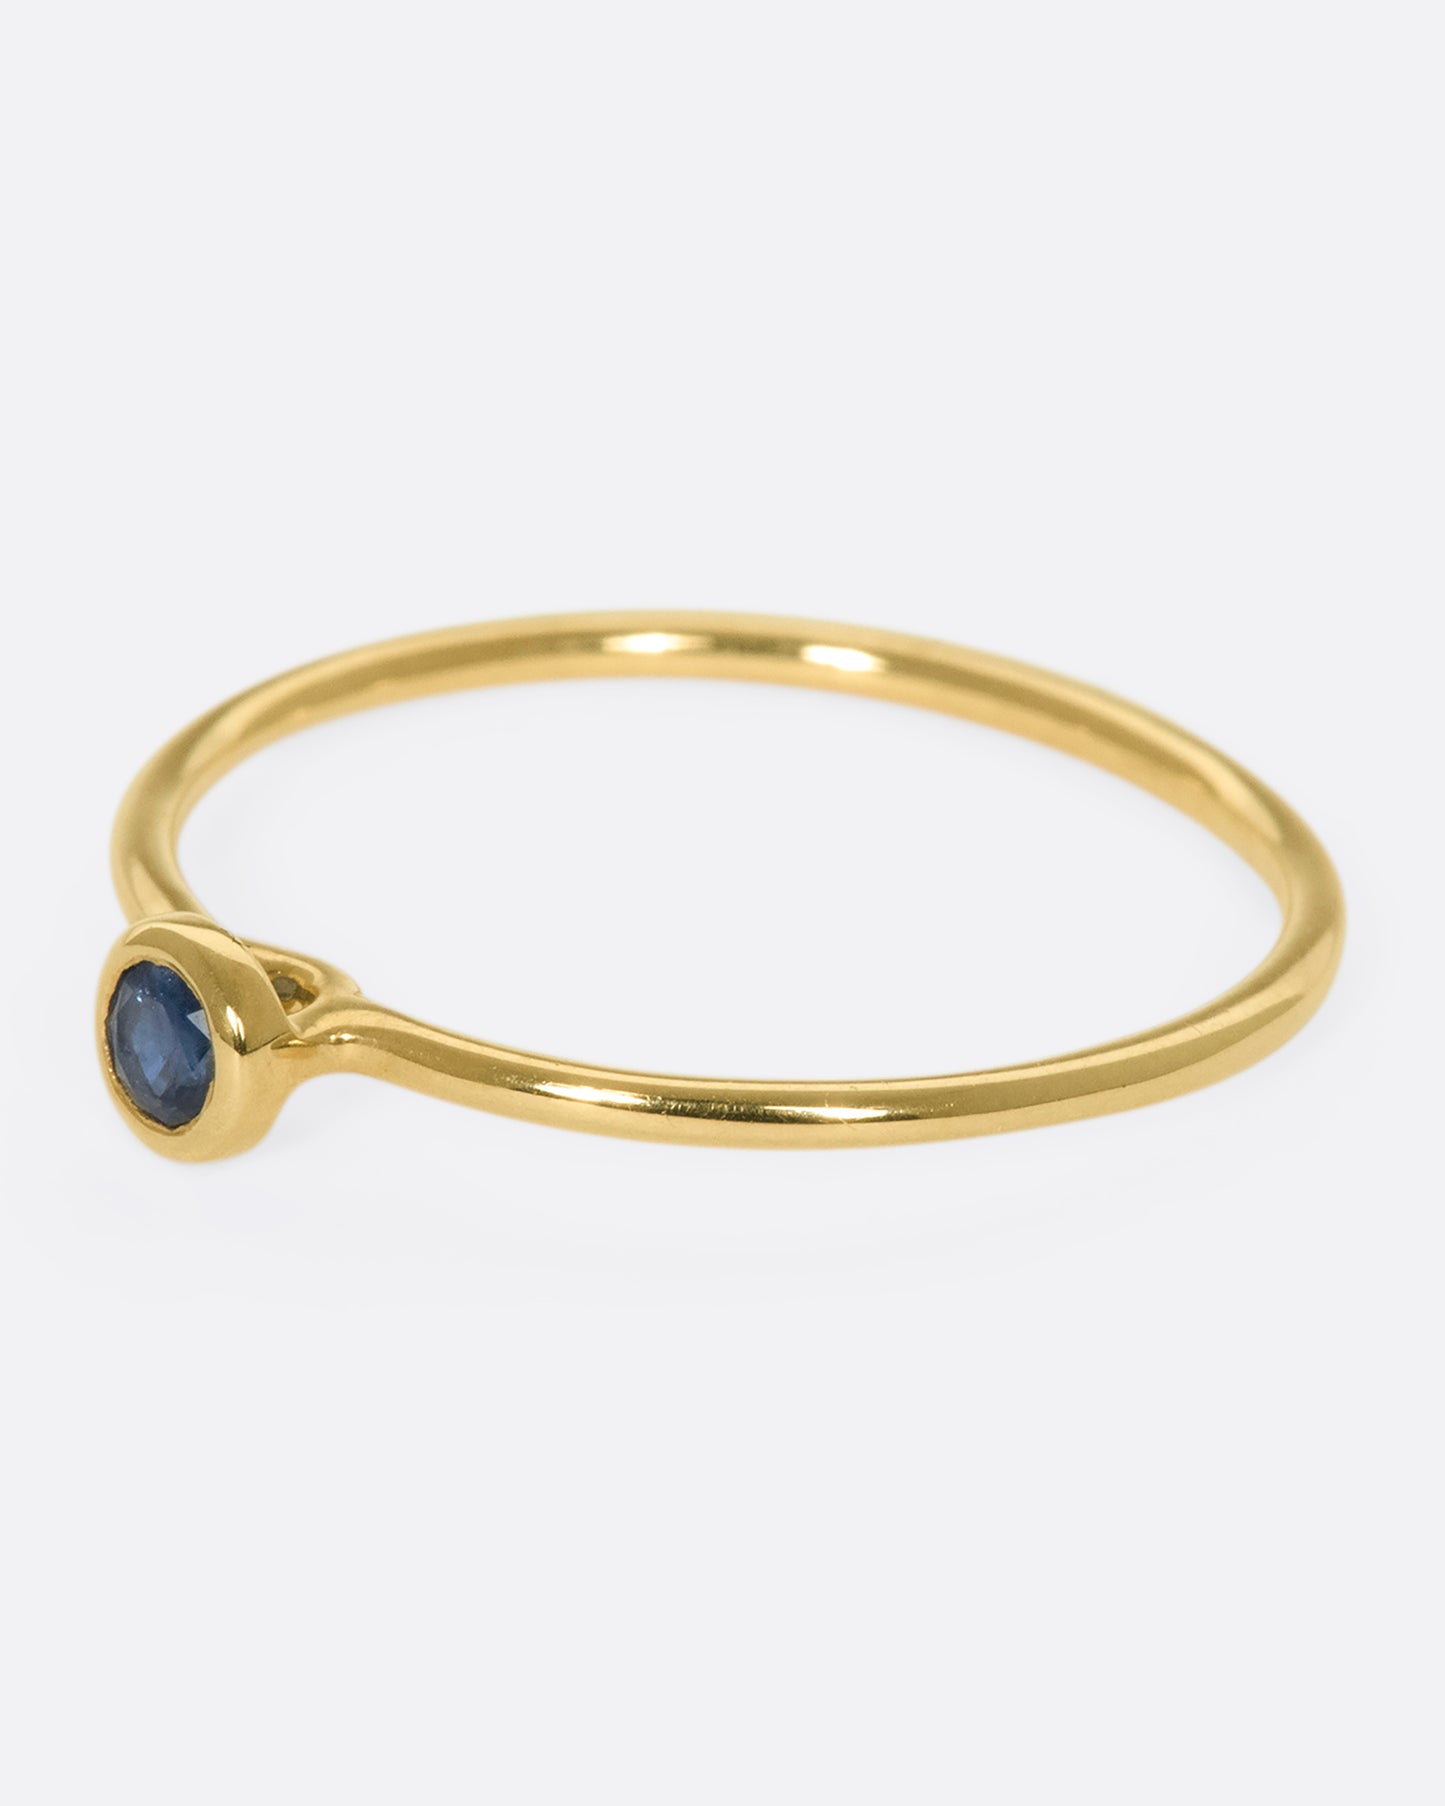 Round blue sapphire set on a 9k gold ring